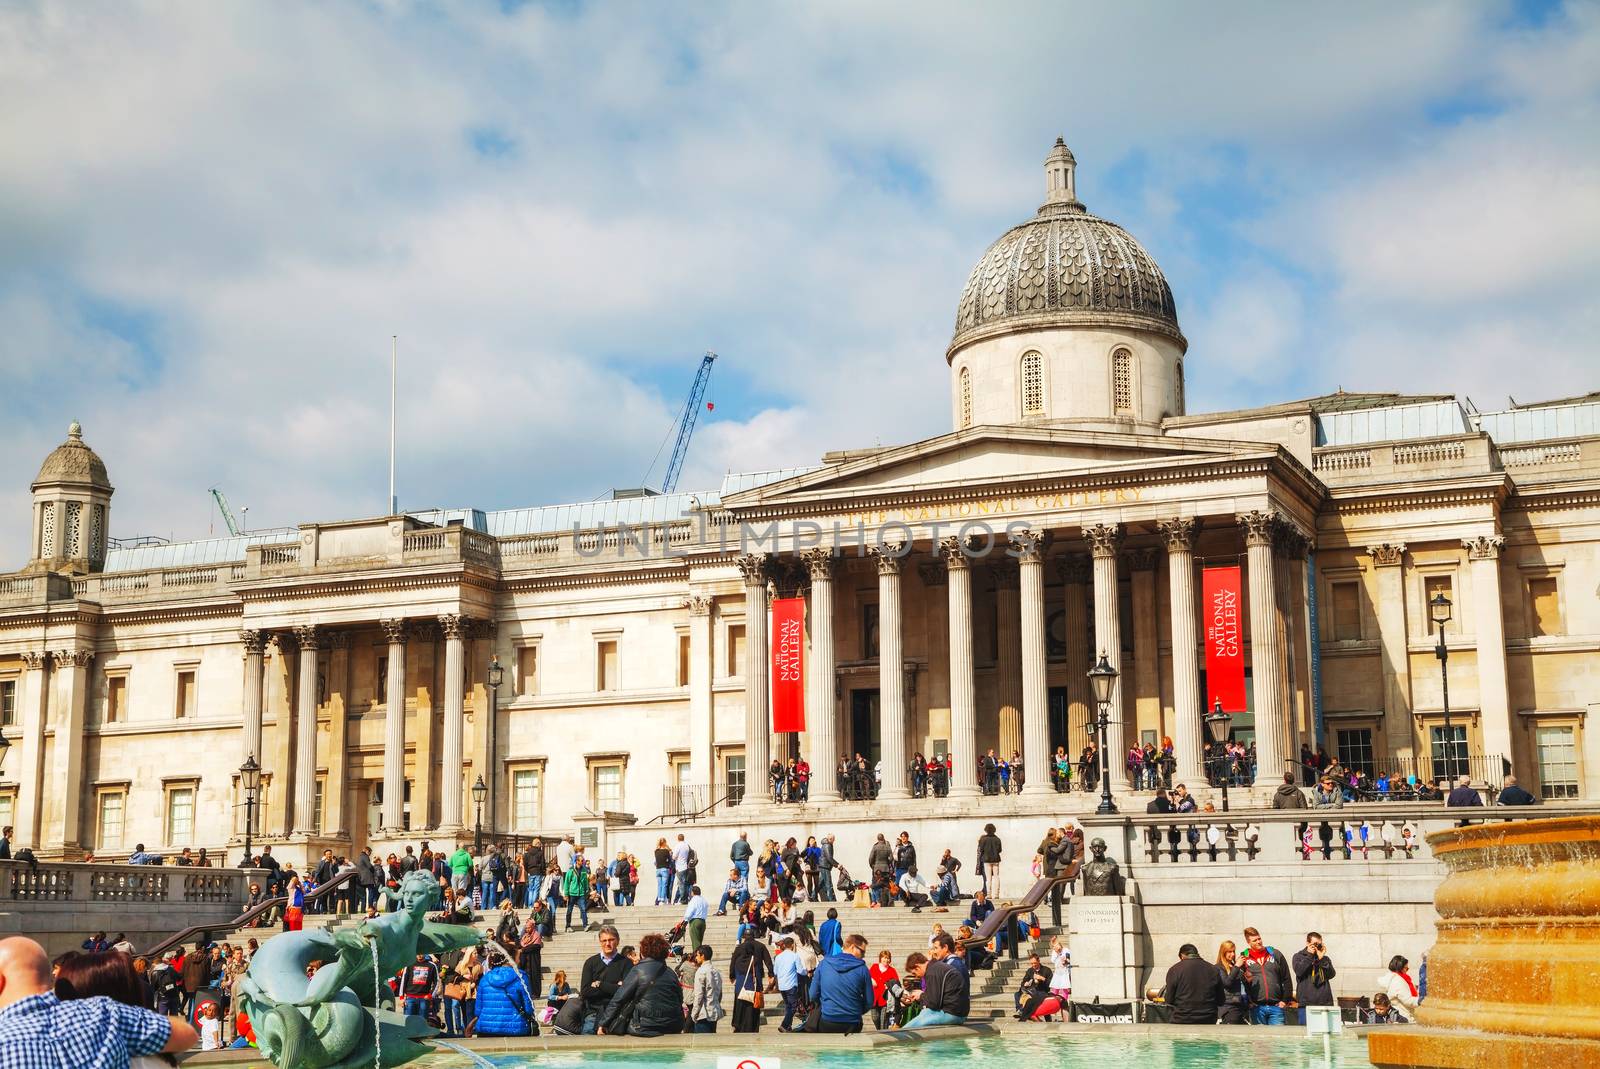 LONDON - APRIL 6: National Gallery building at Trafalgar square on April 6, 2015 in London, UK. Founded in 1824, it houses a collection of over 2,300 paintings dating from the mid-13th century to 1900.